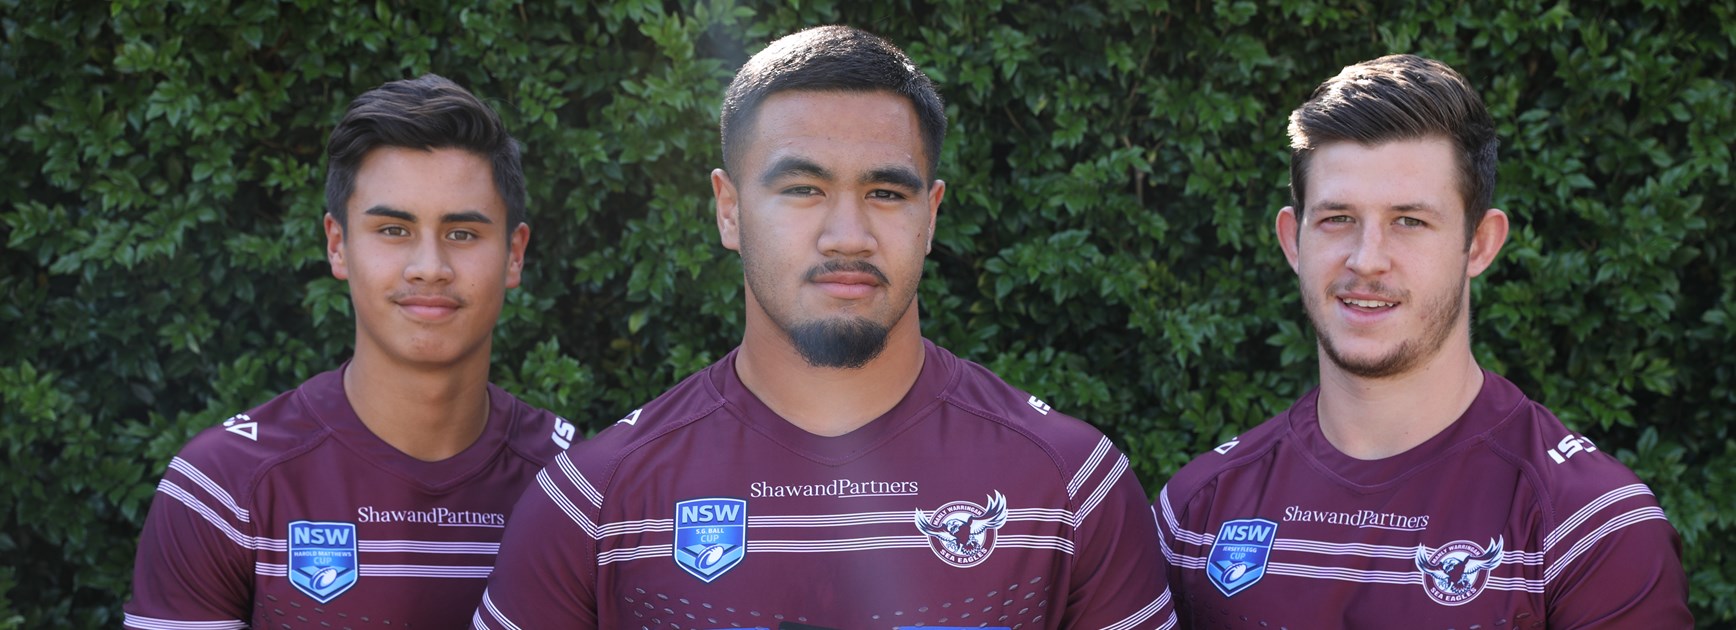 Shaw and Partners increase support of Sea Eagles